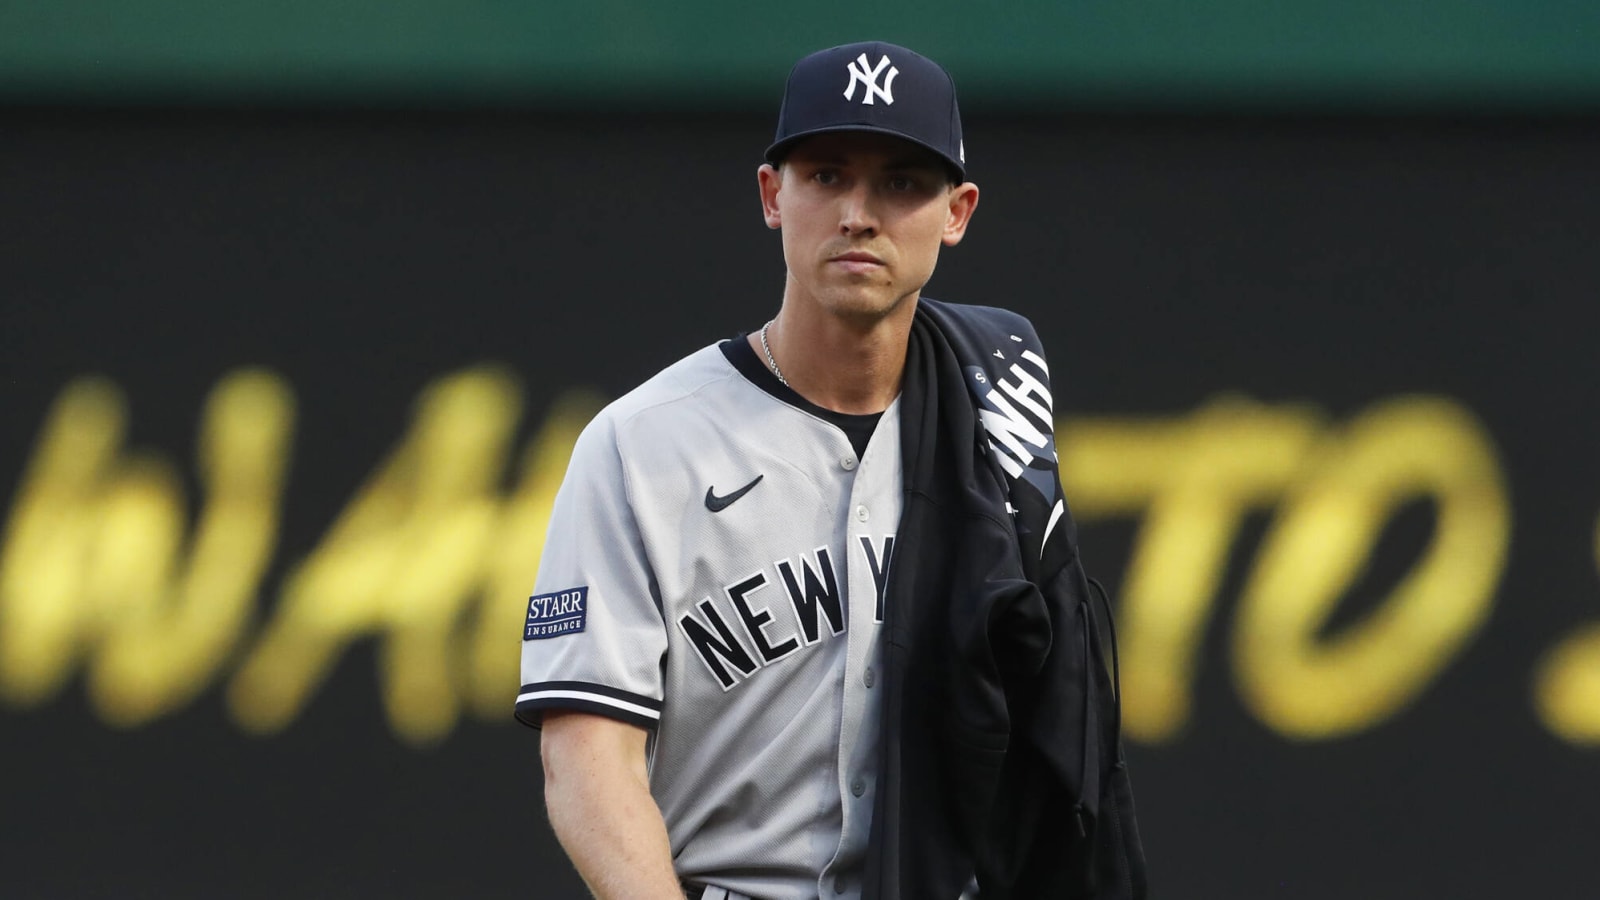 Yankees make free agent signing official, DFA outfielder to clear space on the 40-man